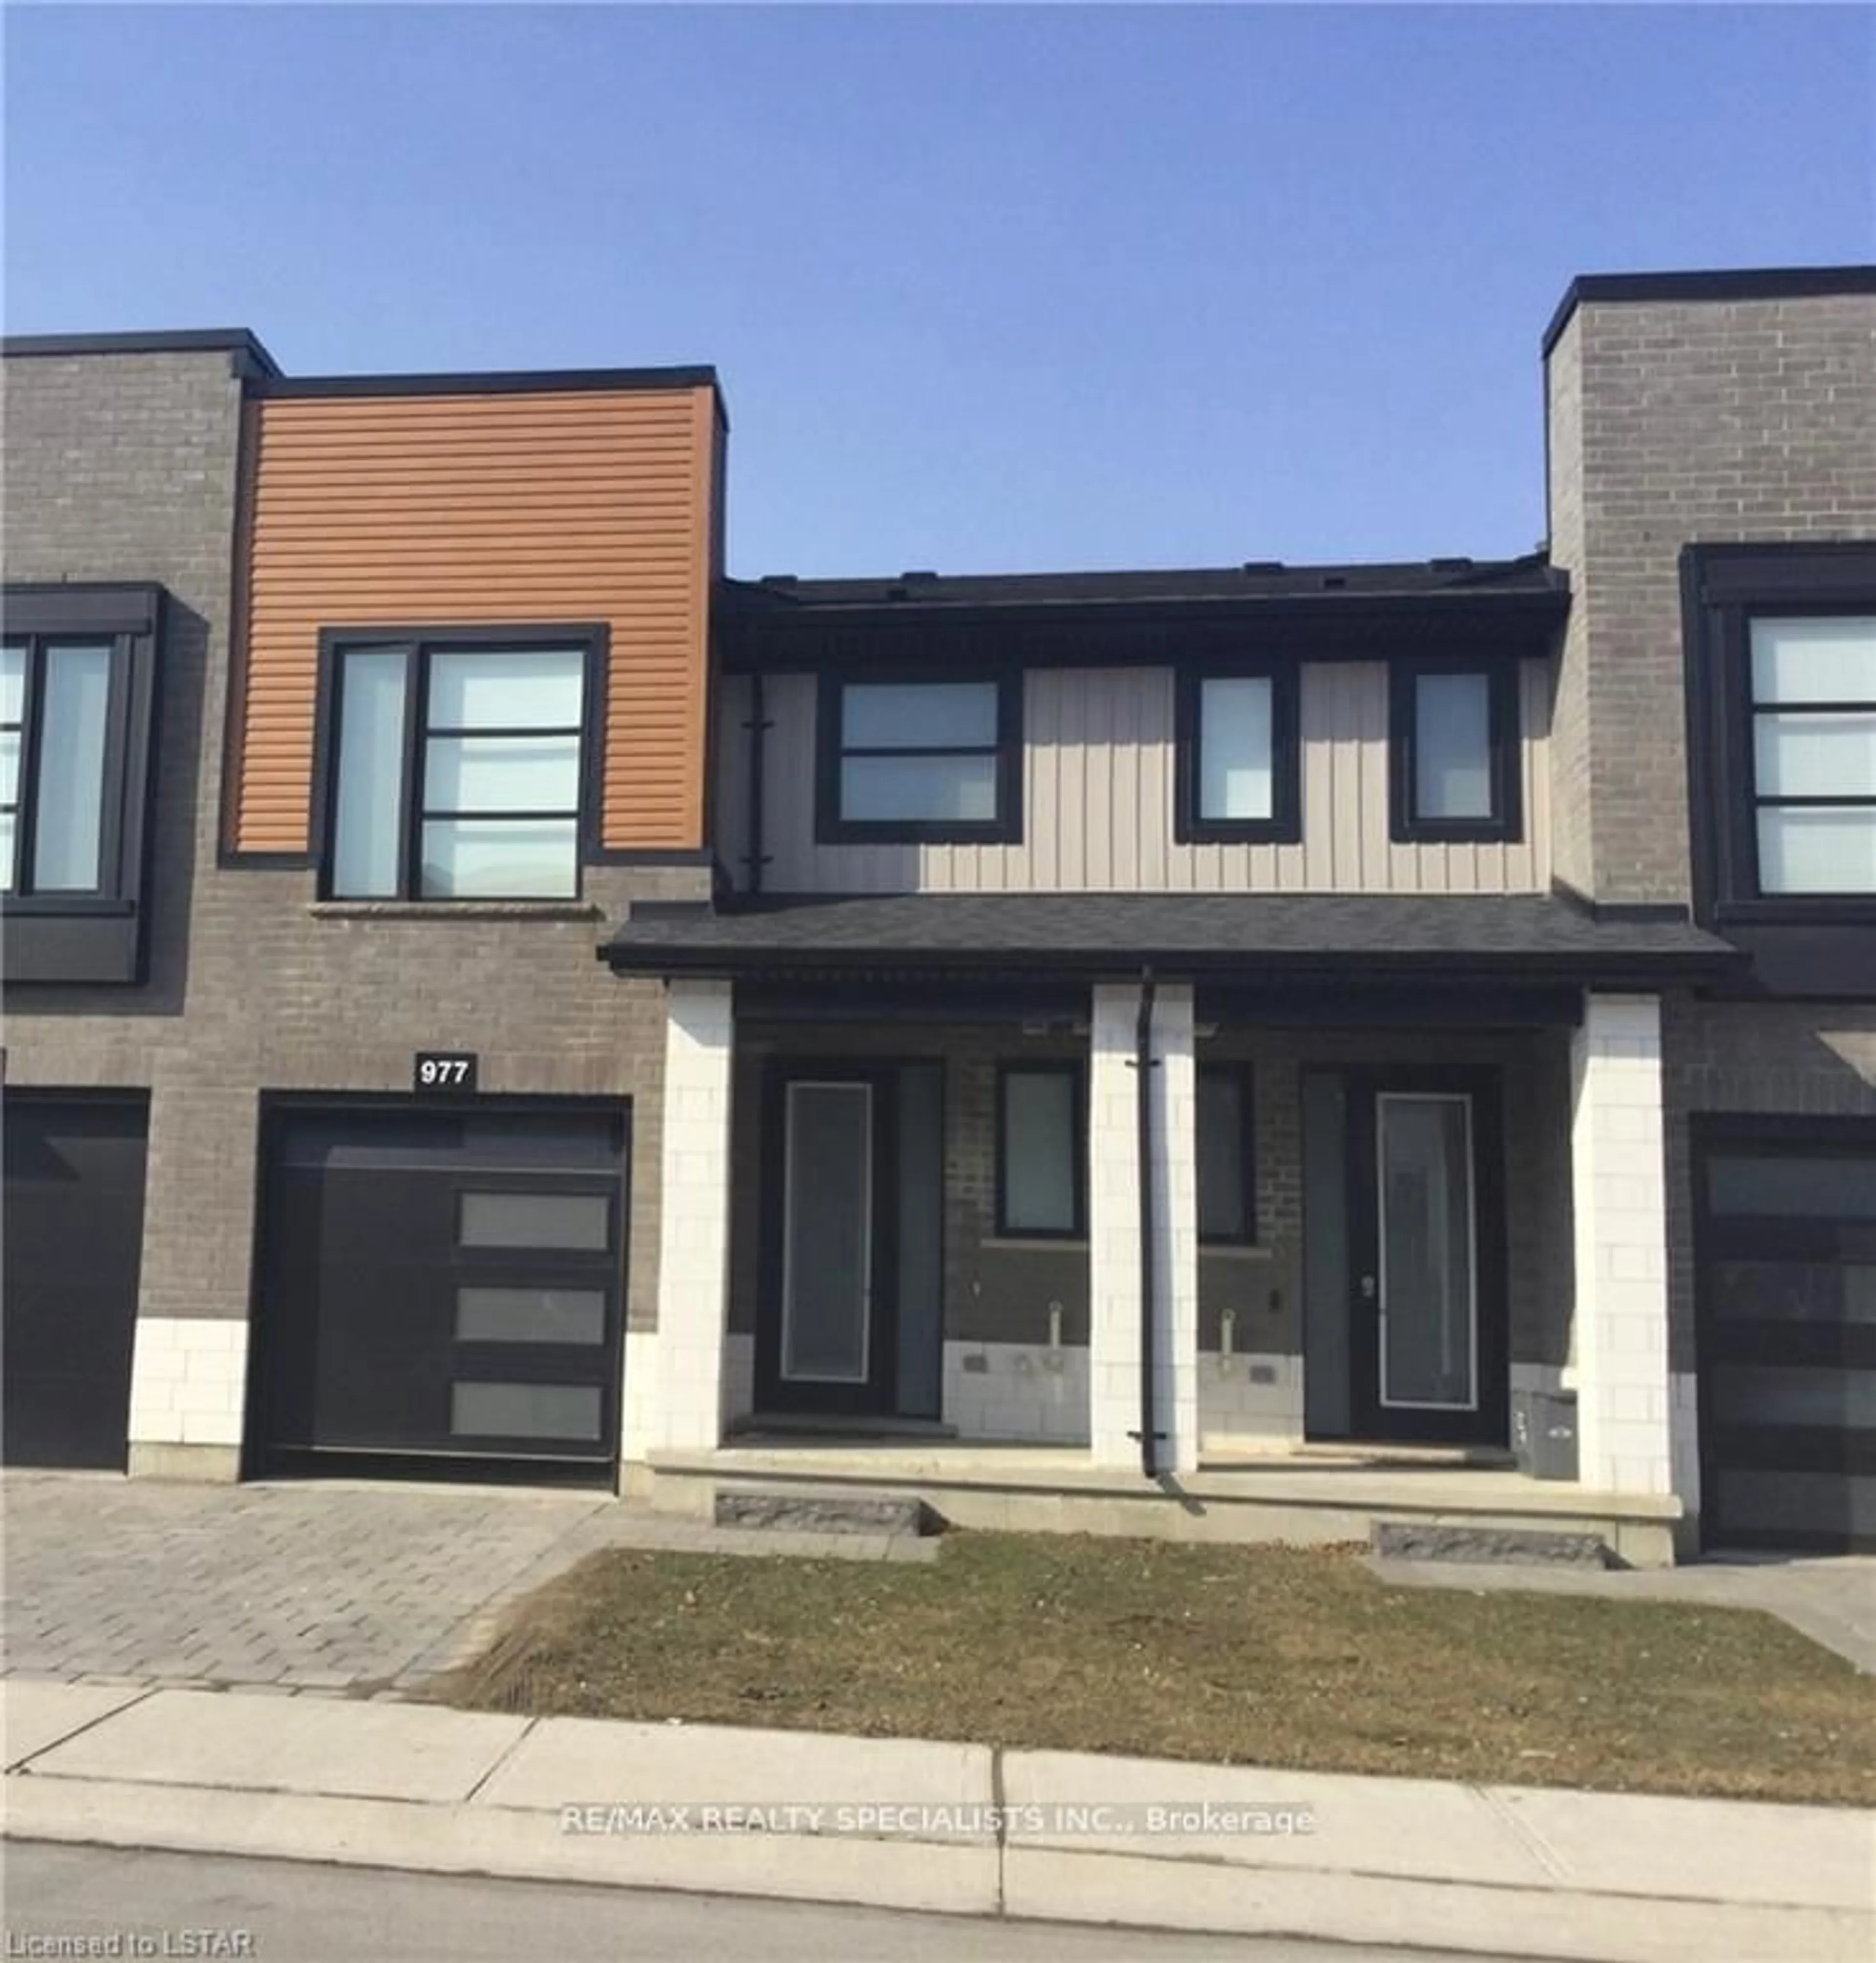 Home with brick exterior material for 977 West Village Sq #977, London Ontario N6H 0J7